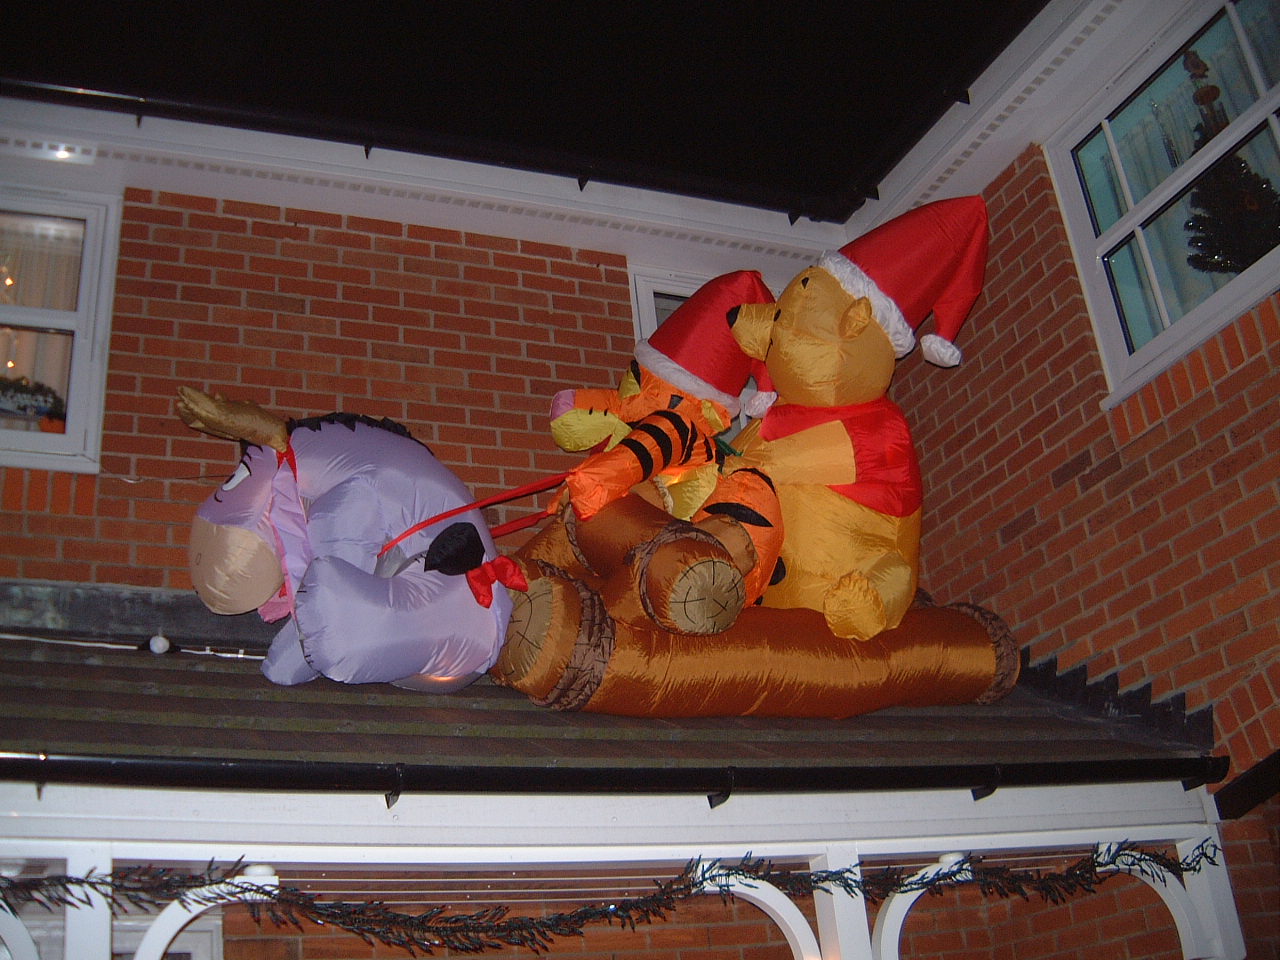 Our Winnie The Pooh Christmas Blow Up.